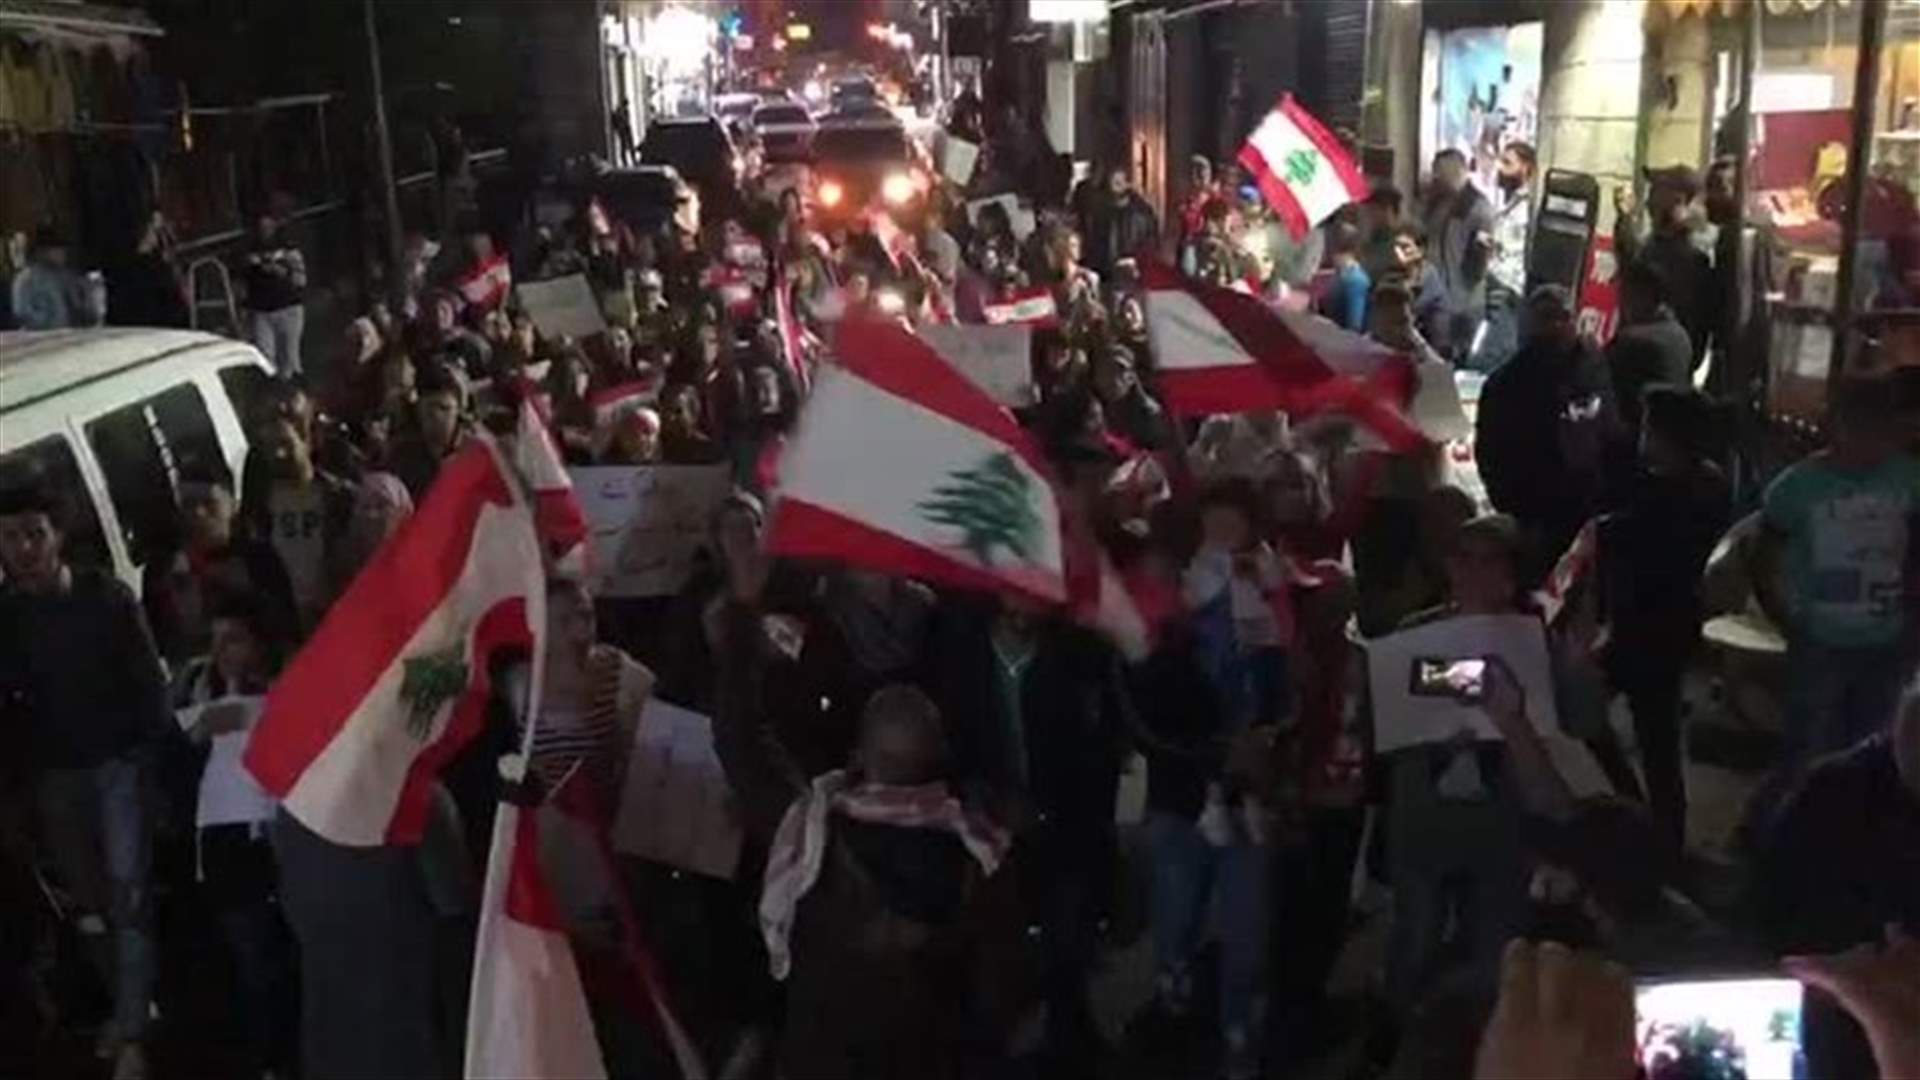 Protesters stage sit-in in Baalbek, rally through city’s streets (Video)